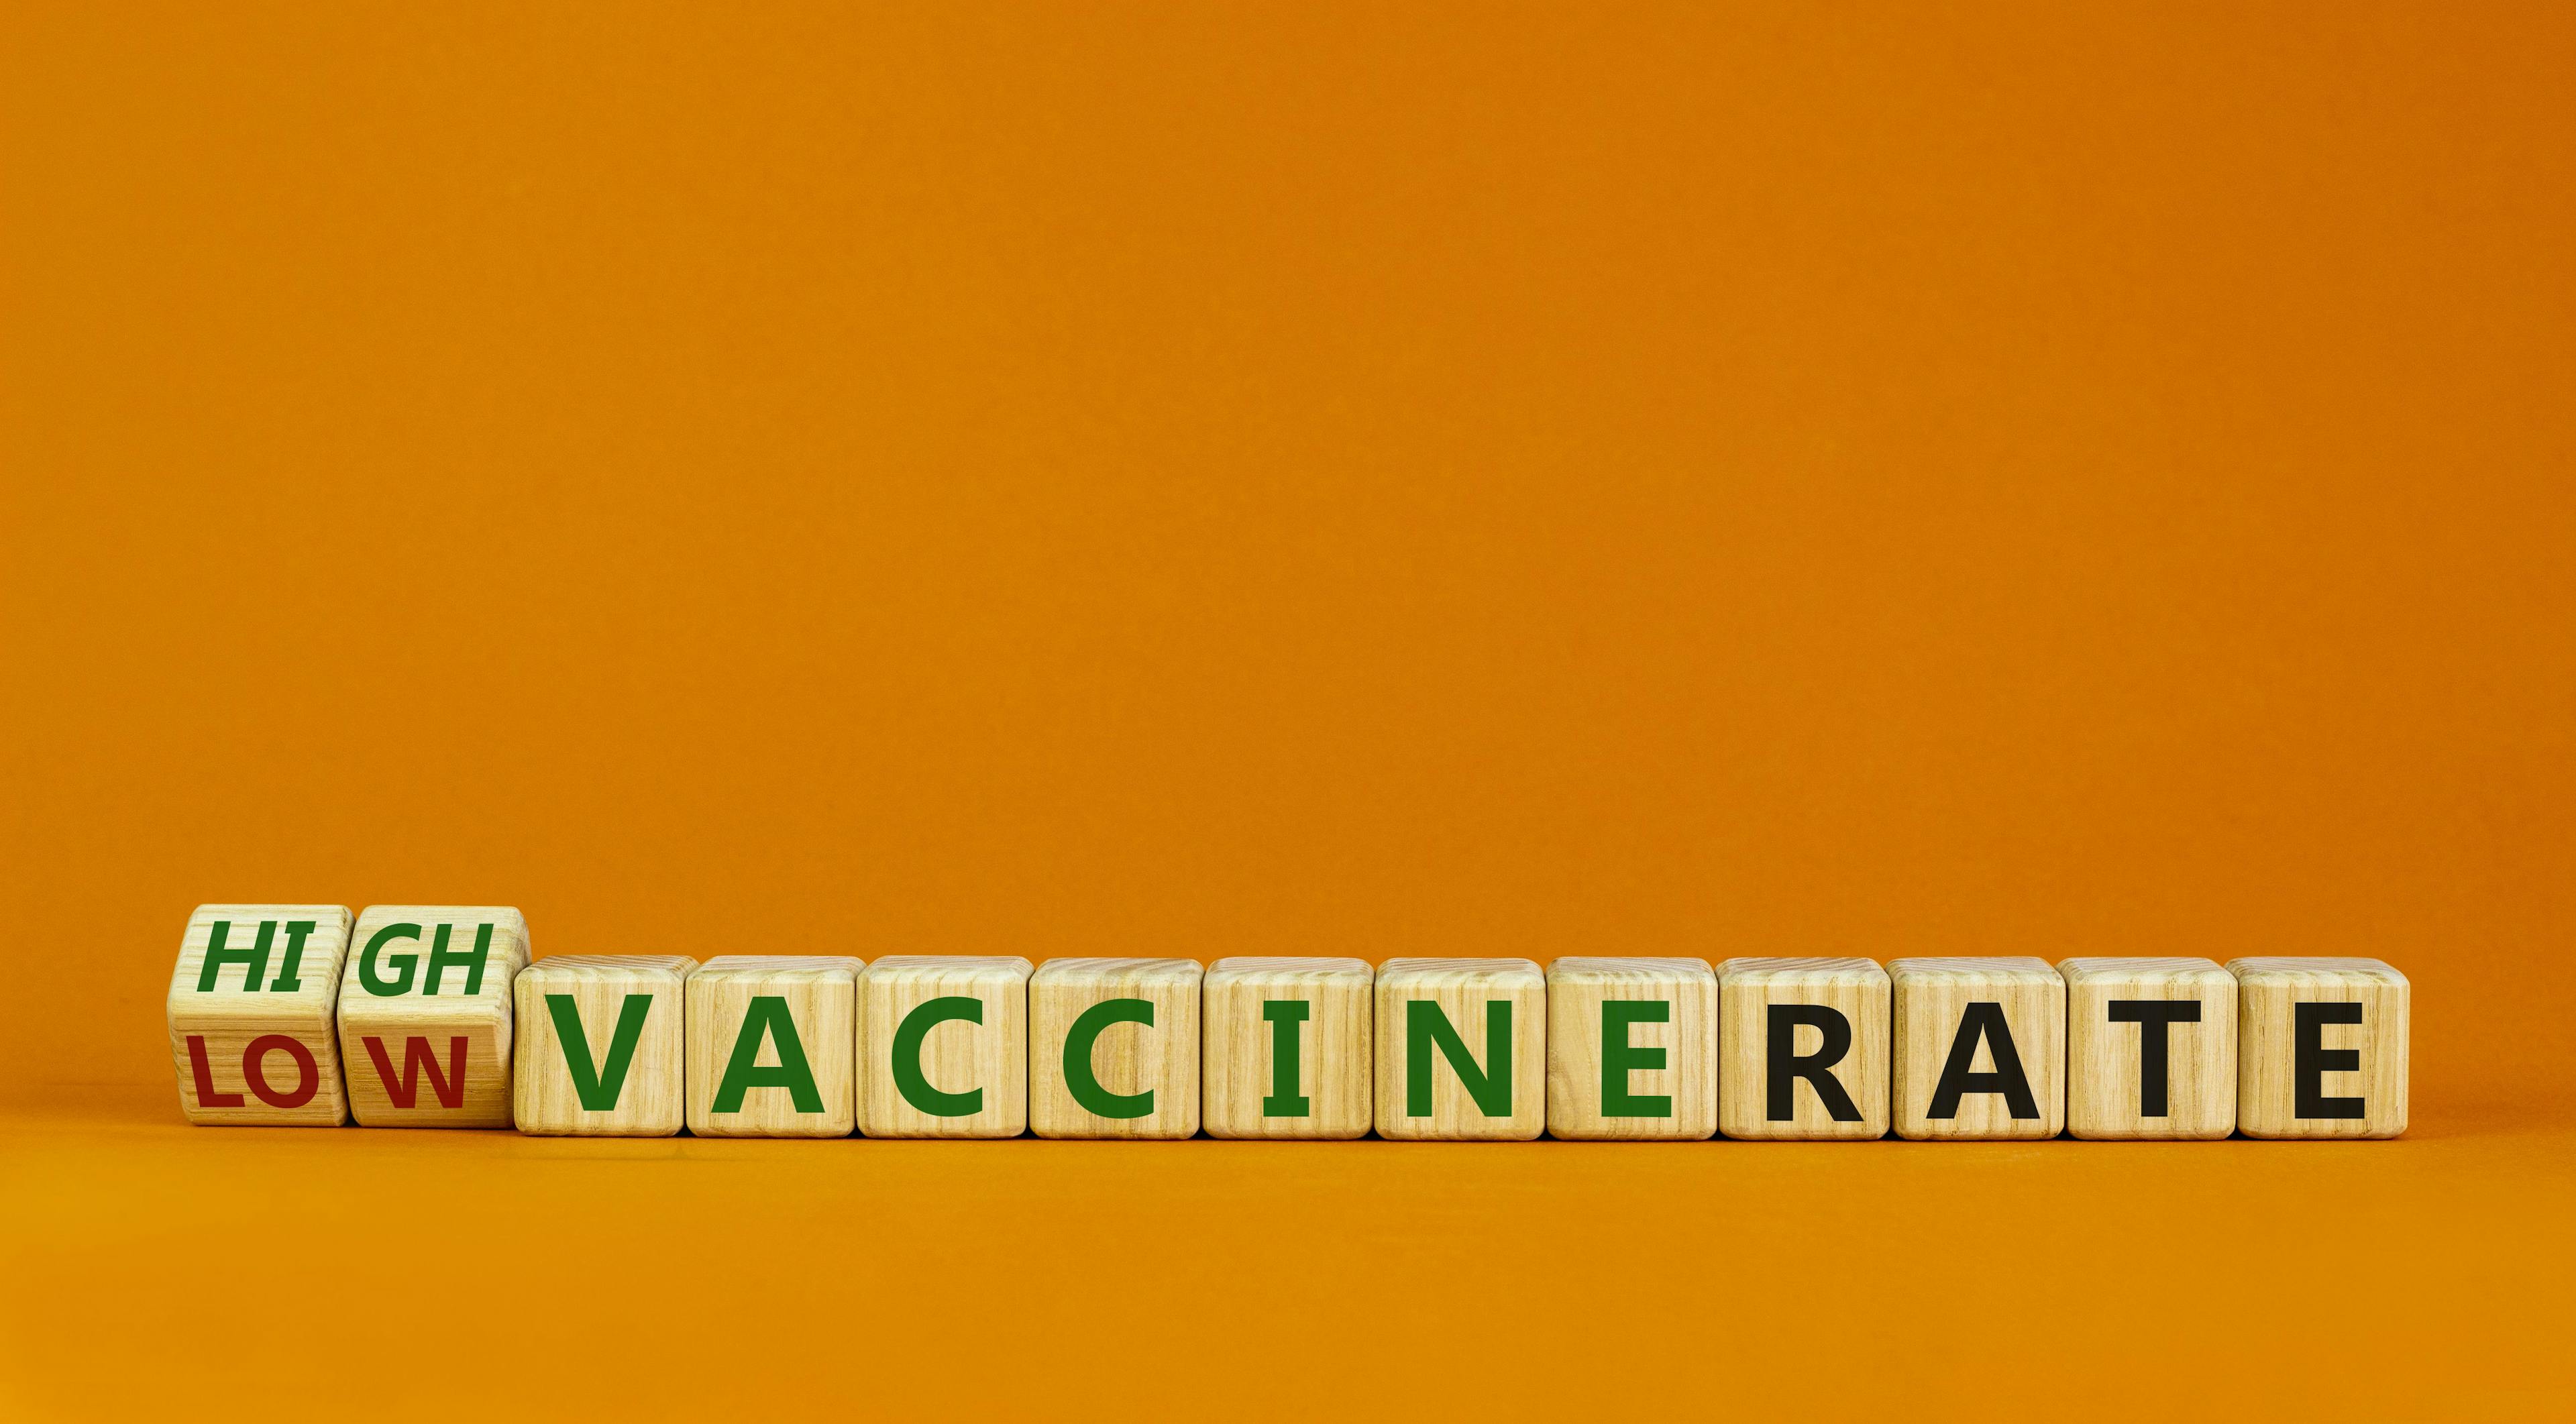 A new study found states that offered monetary prizes to randomly selected vaccinated persons did not have significant increases in vaccine uptake.